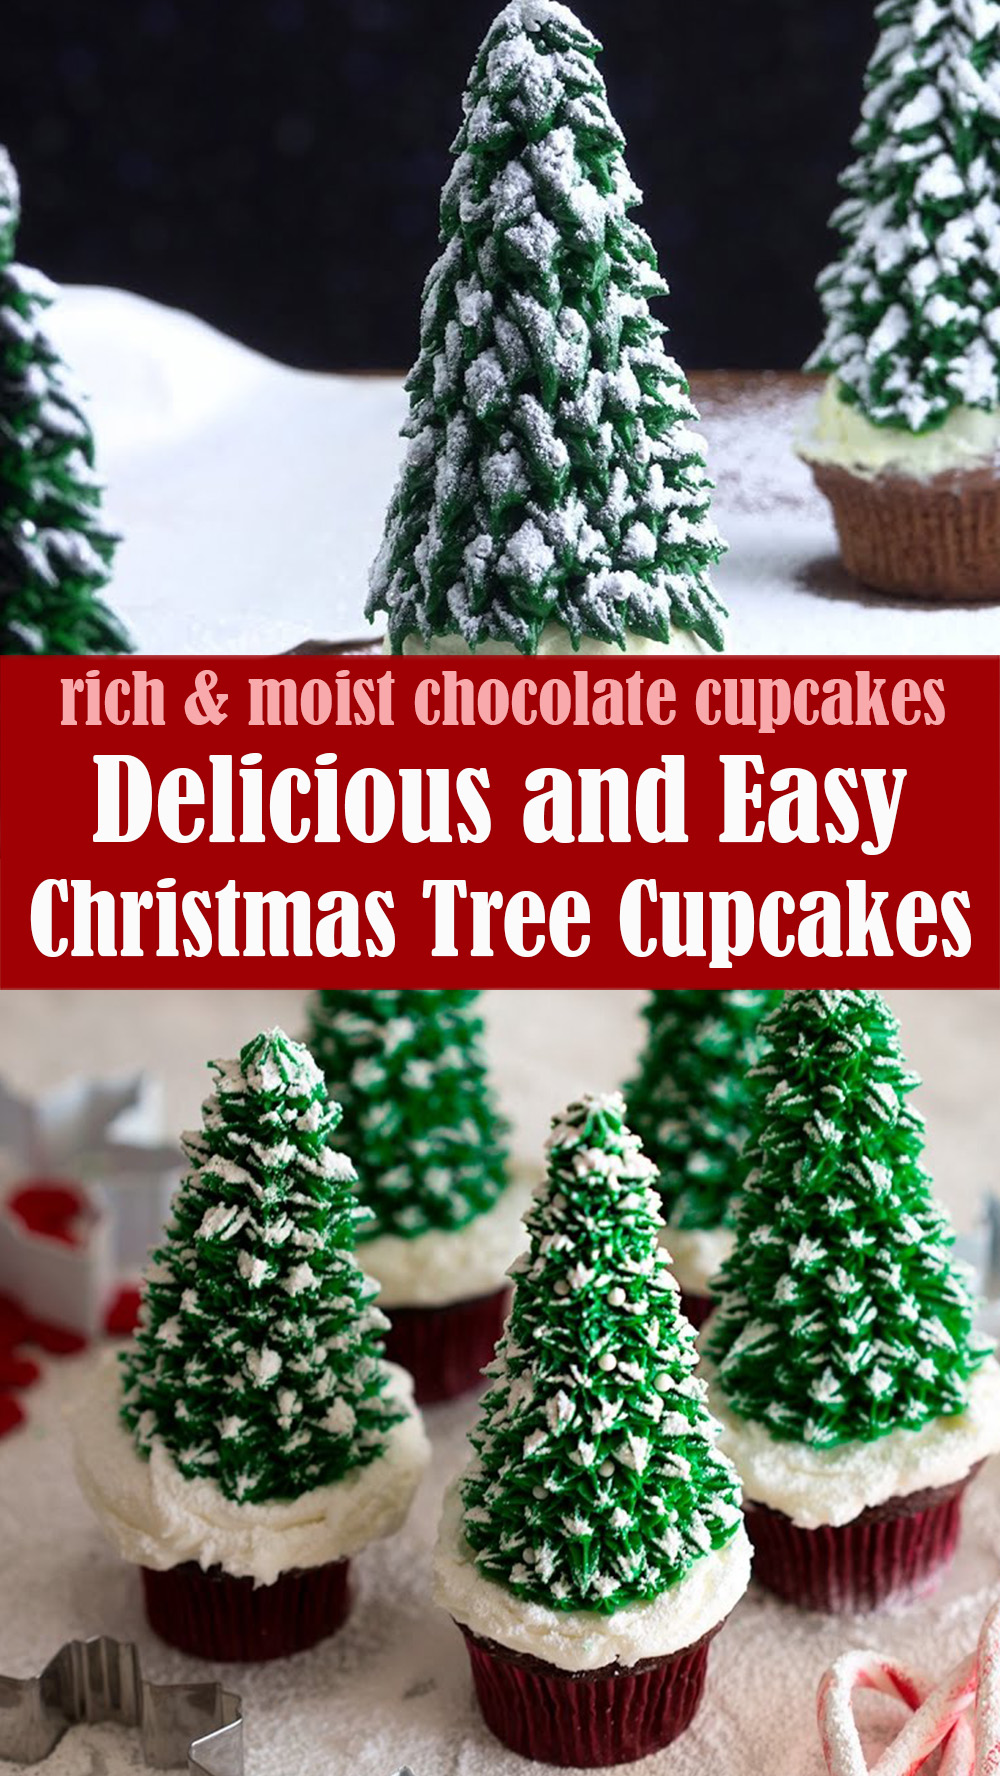 Delicious and Easy Christmas Tree Cupcakes